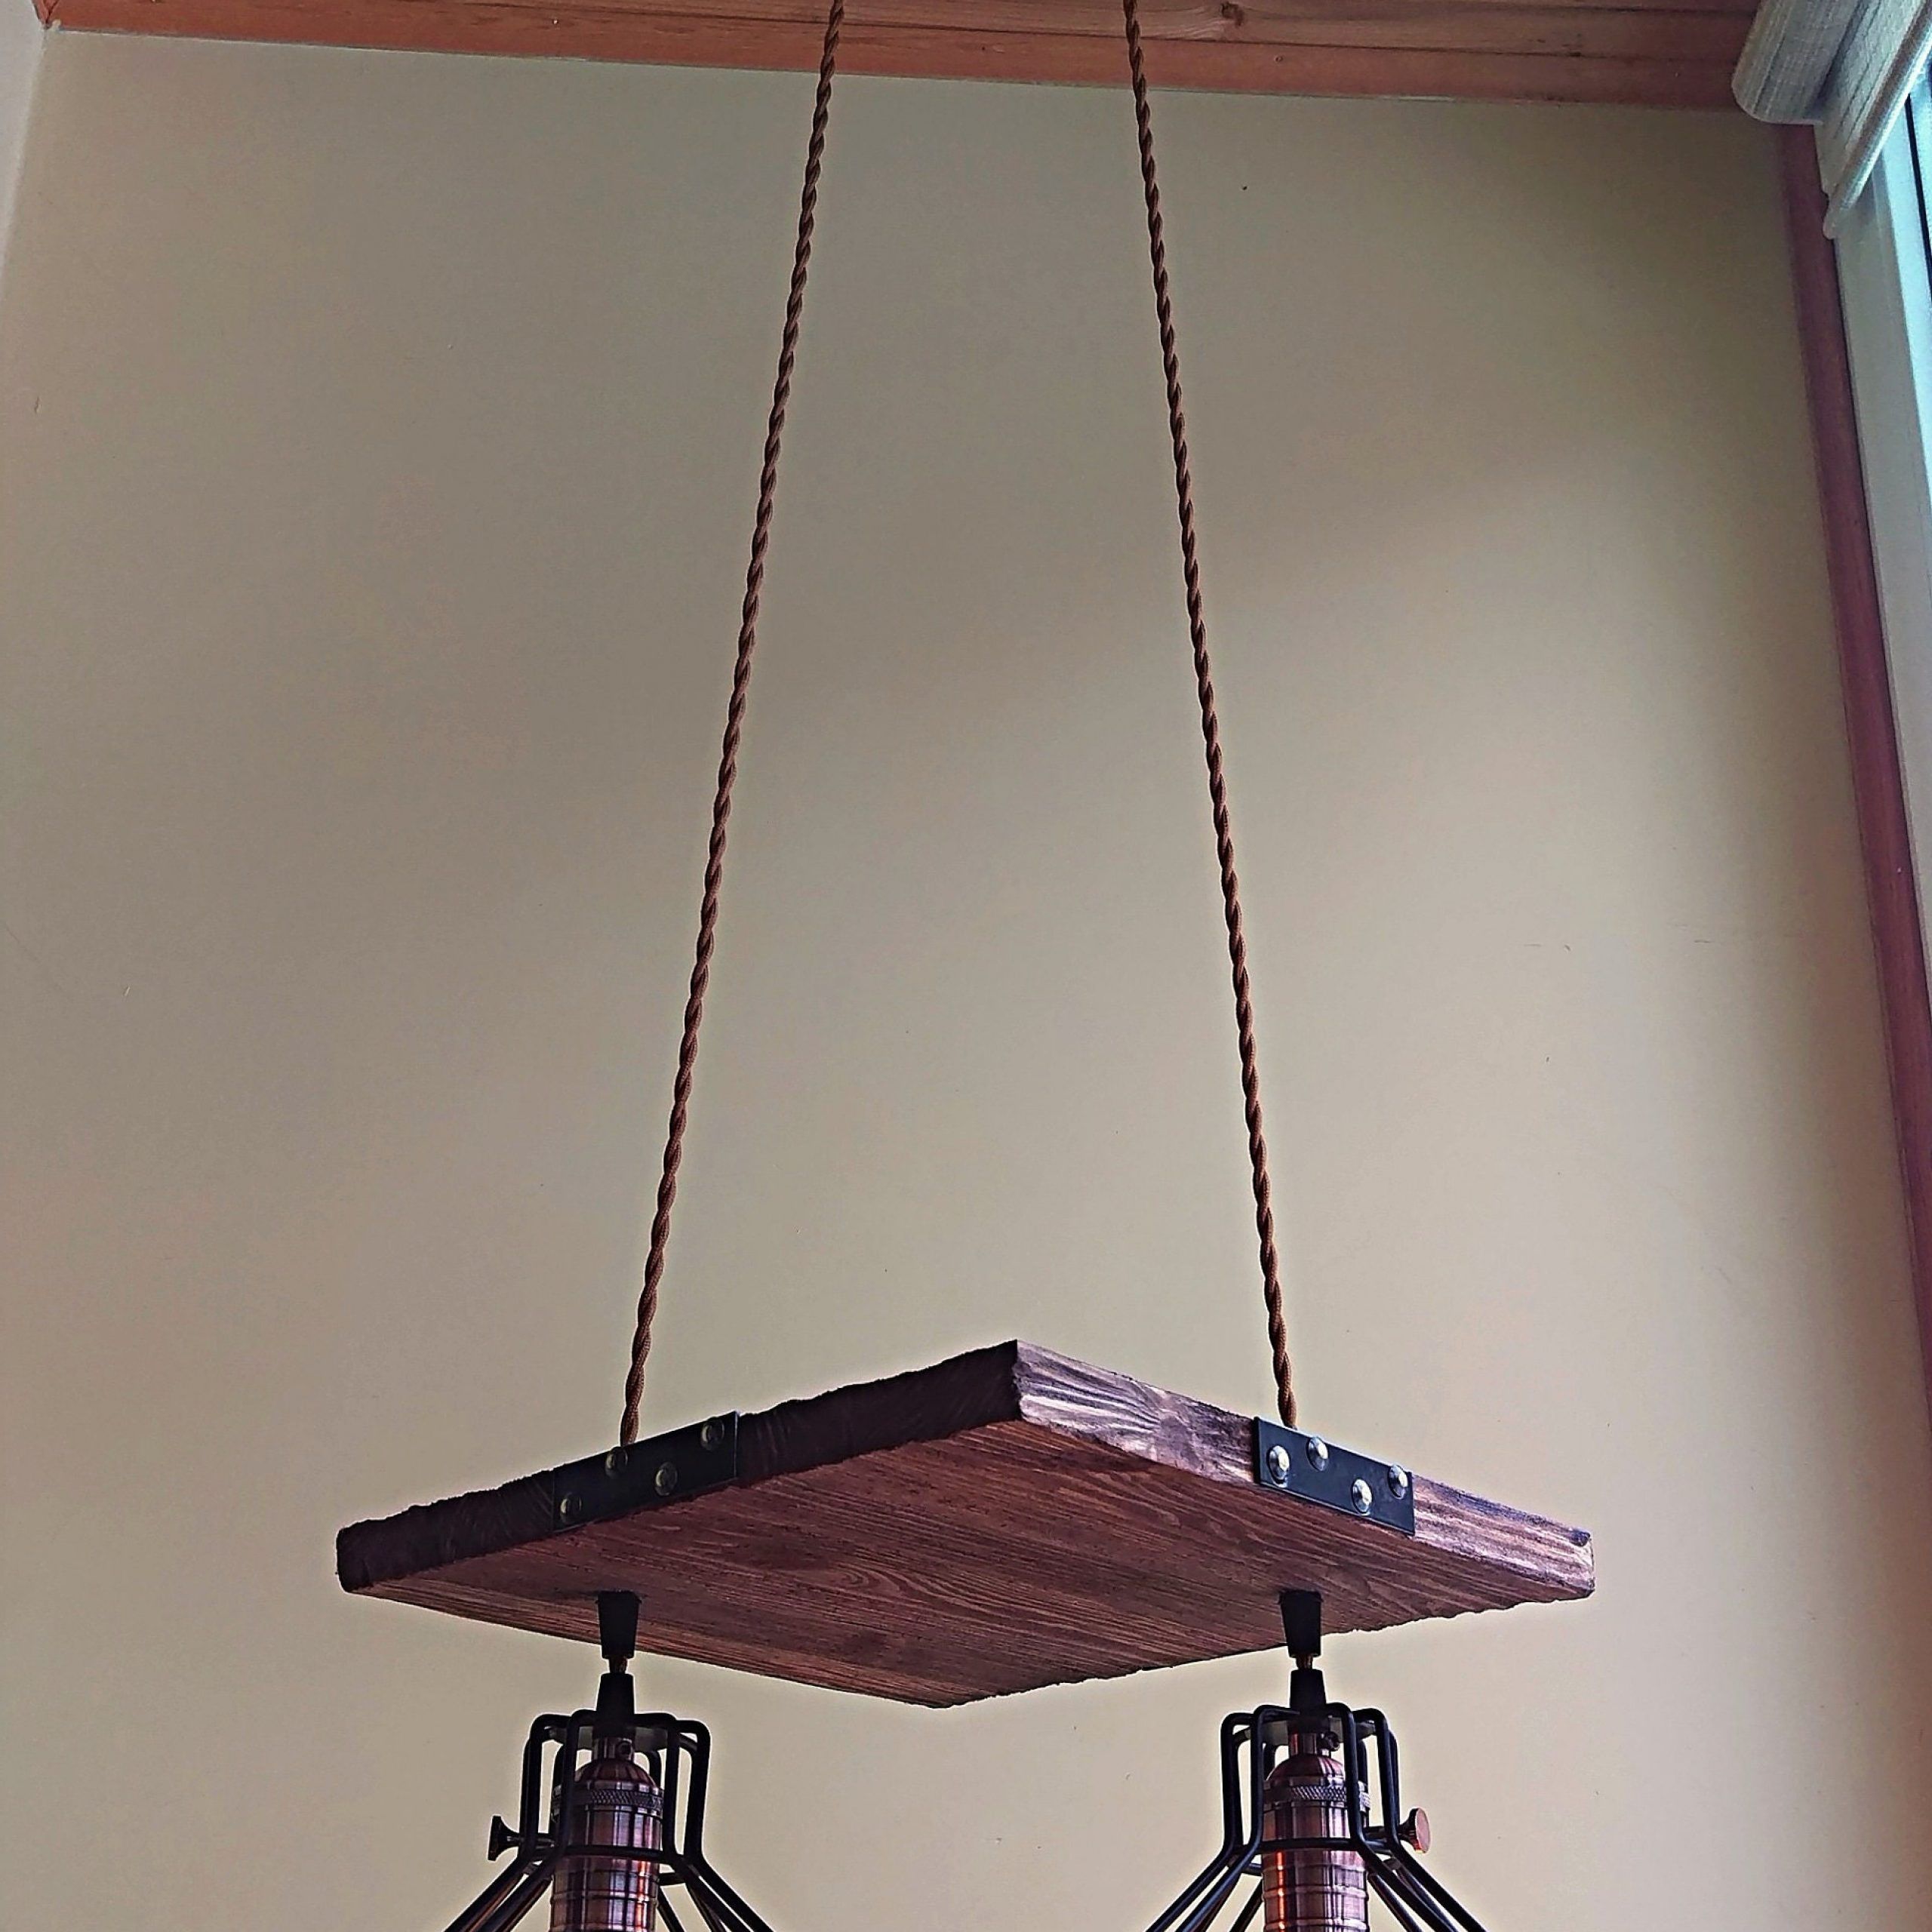 Most Recently Released Dark Wood Ceiling Light Fixture With Metal Lamp Shades Inside Black Wood Grain Kitchen Island Light Pendant Lights (View 7 of 15)